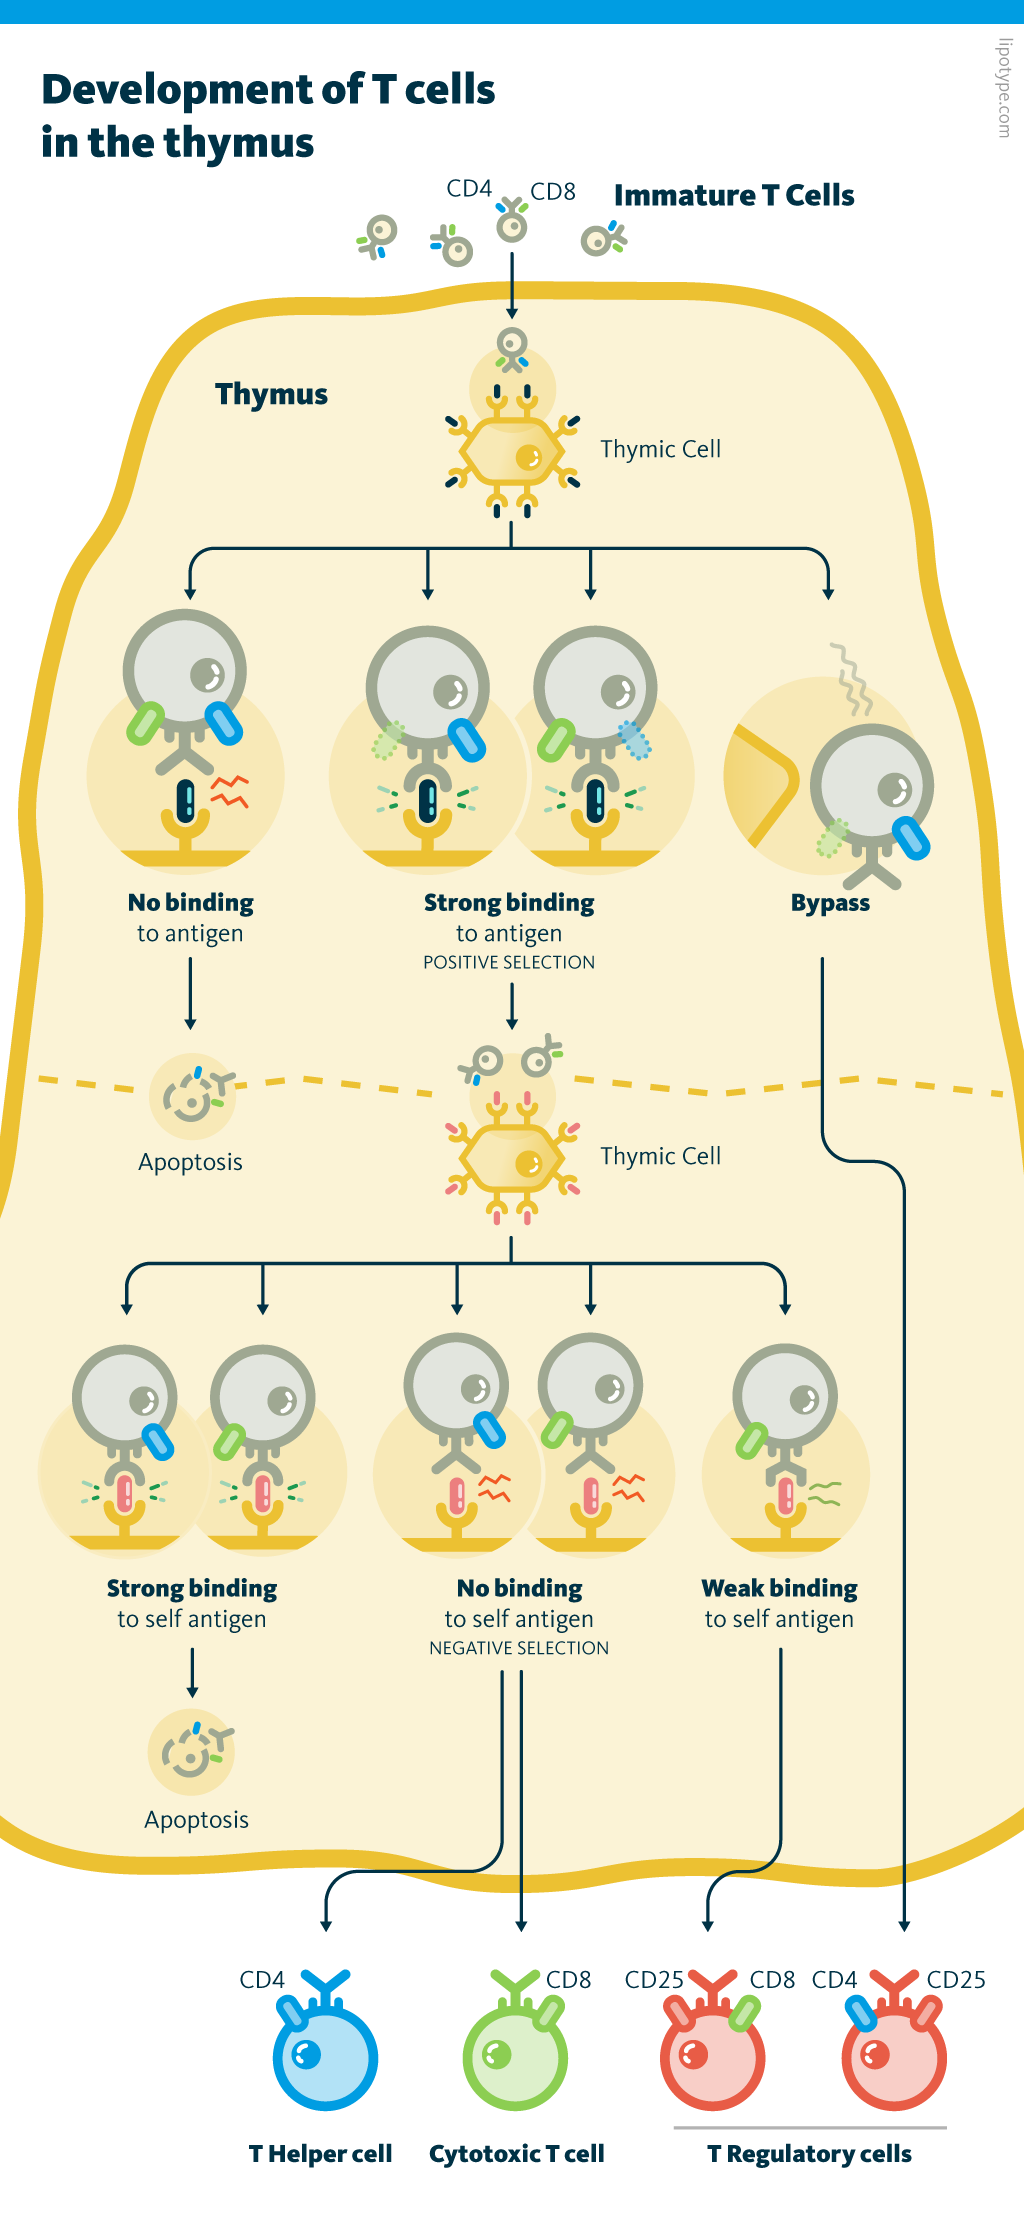 An infographic presenting an overview for the development of immature T cells into T helper cells, cytotoxic T cells, and the two types of T regulatory cells (CD8+ and CD4+) in the thymus. Both, negative and positive selection are shown.